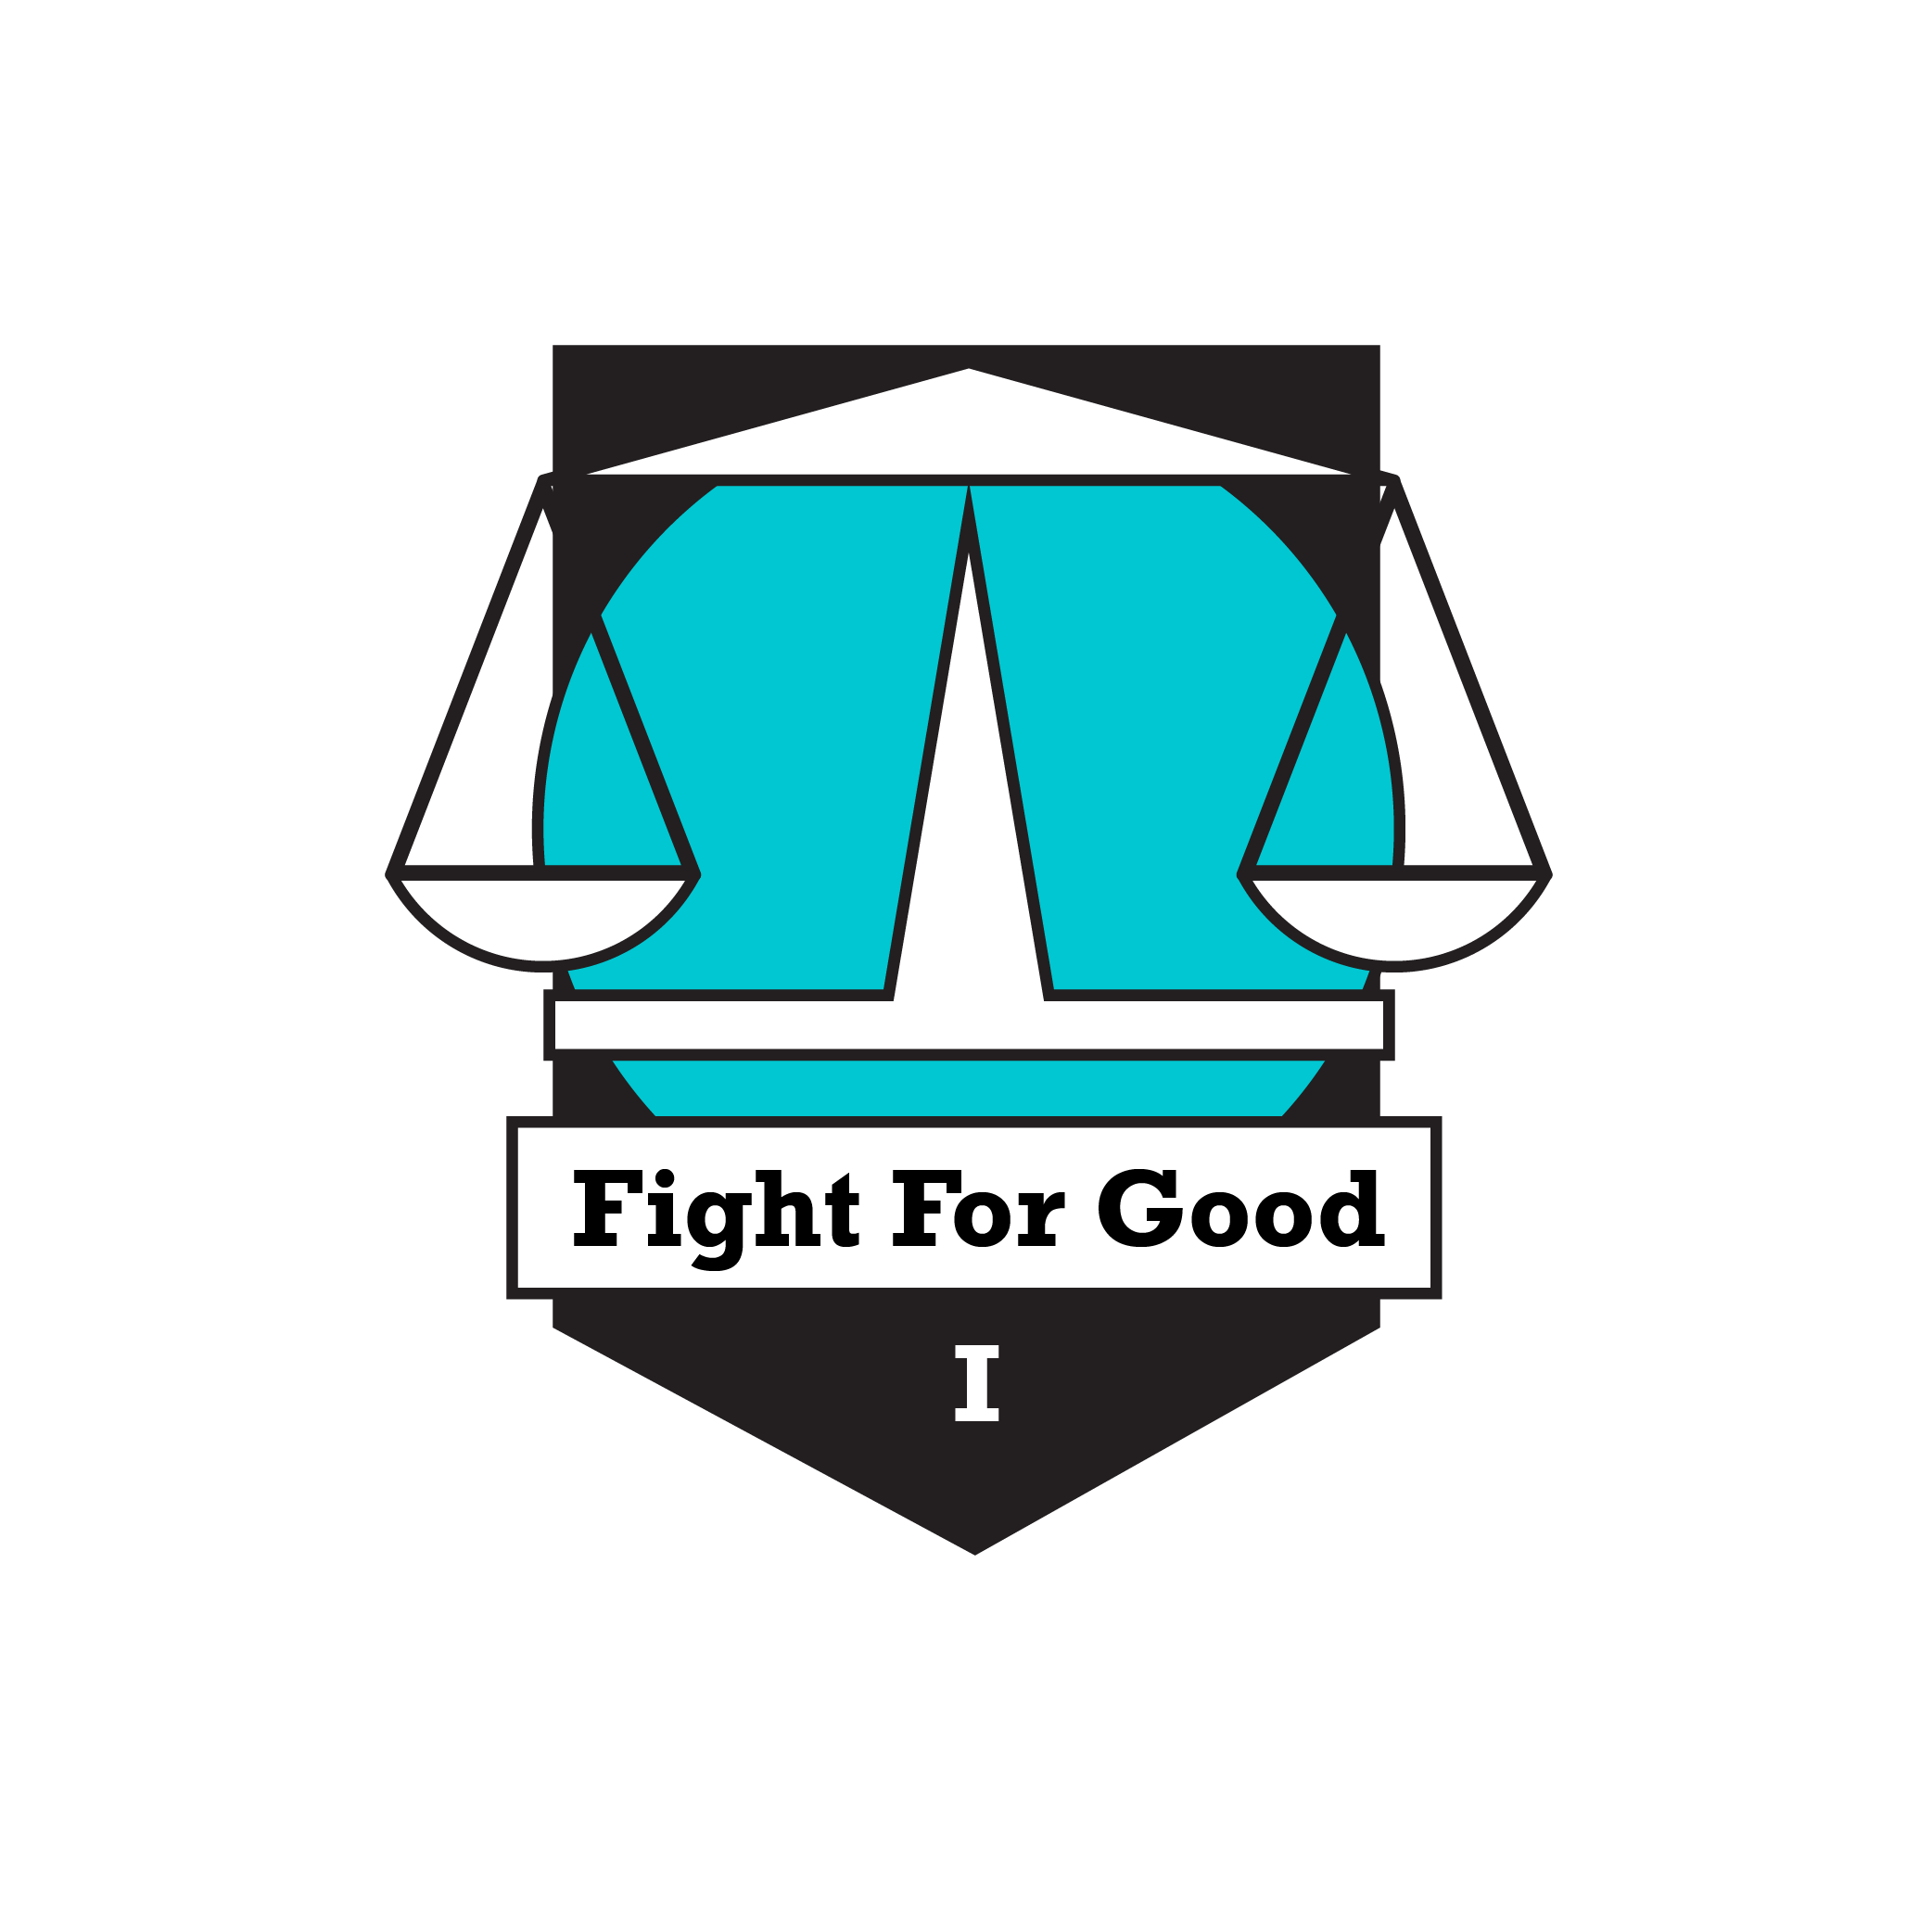 Fight for Good badge has the scales of justice on a turquoise background